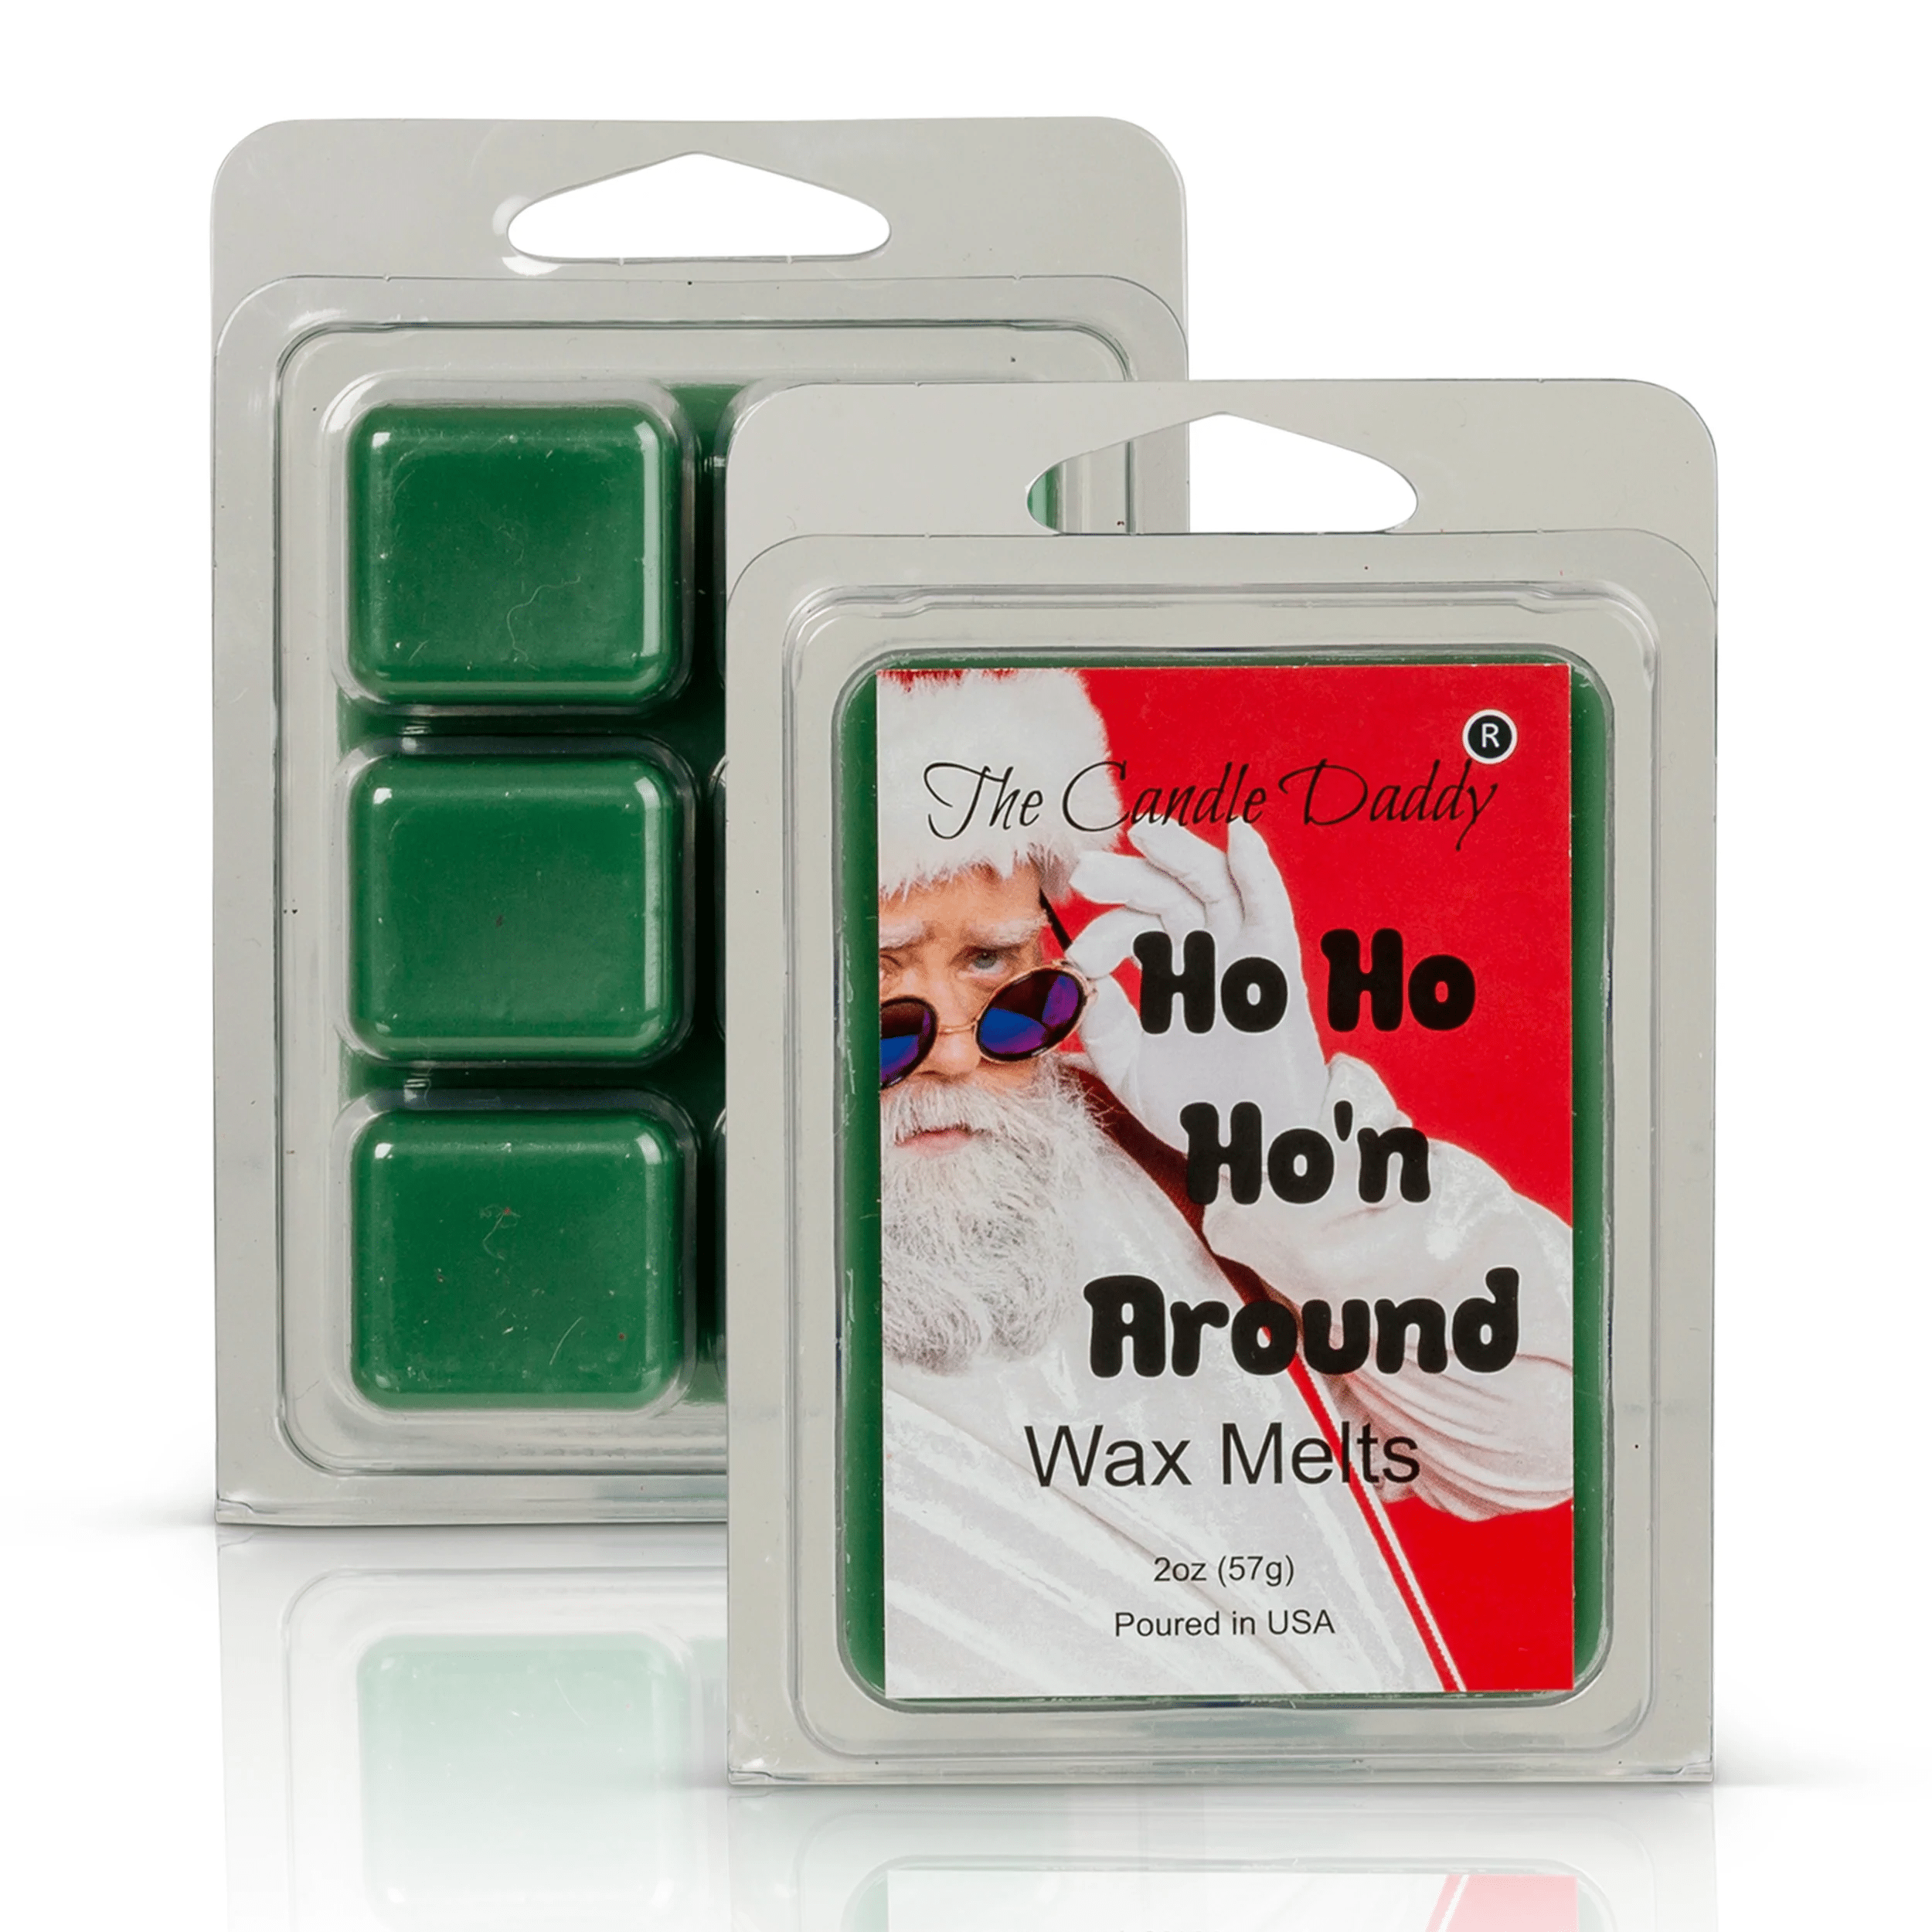 Lavish Unstoppable Christmas highly scented wax melts